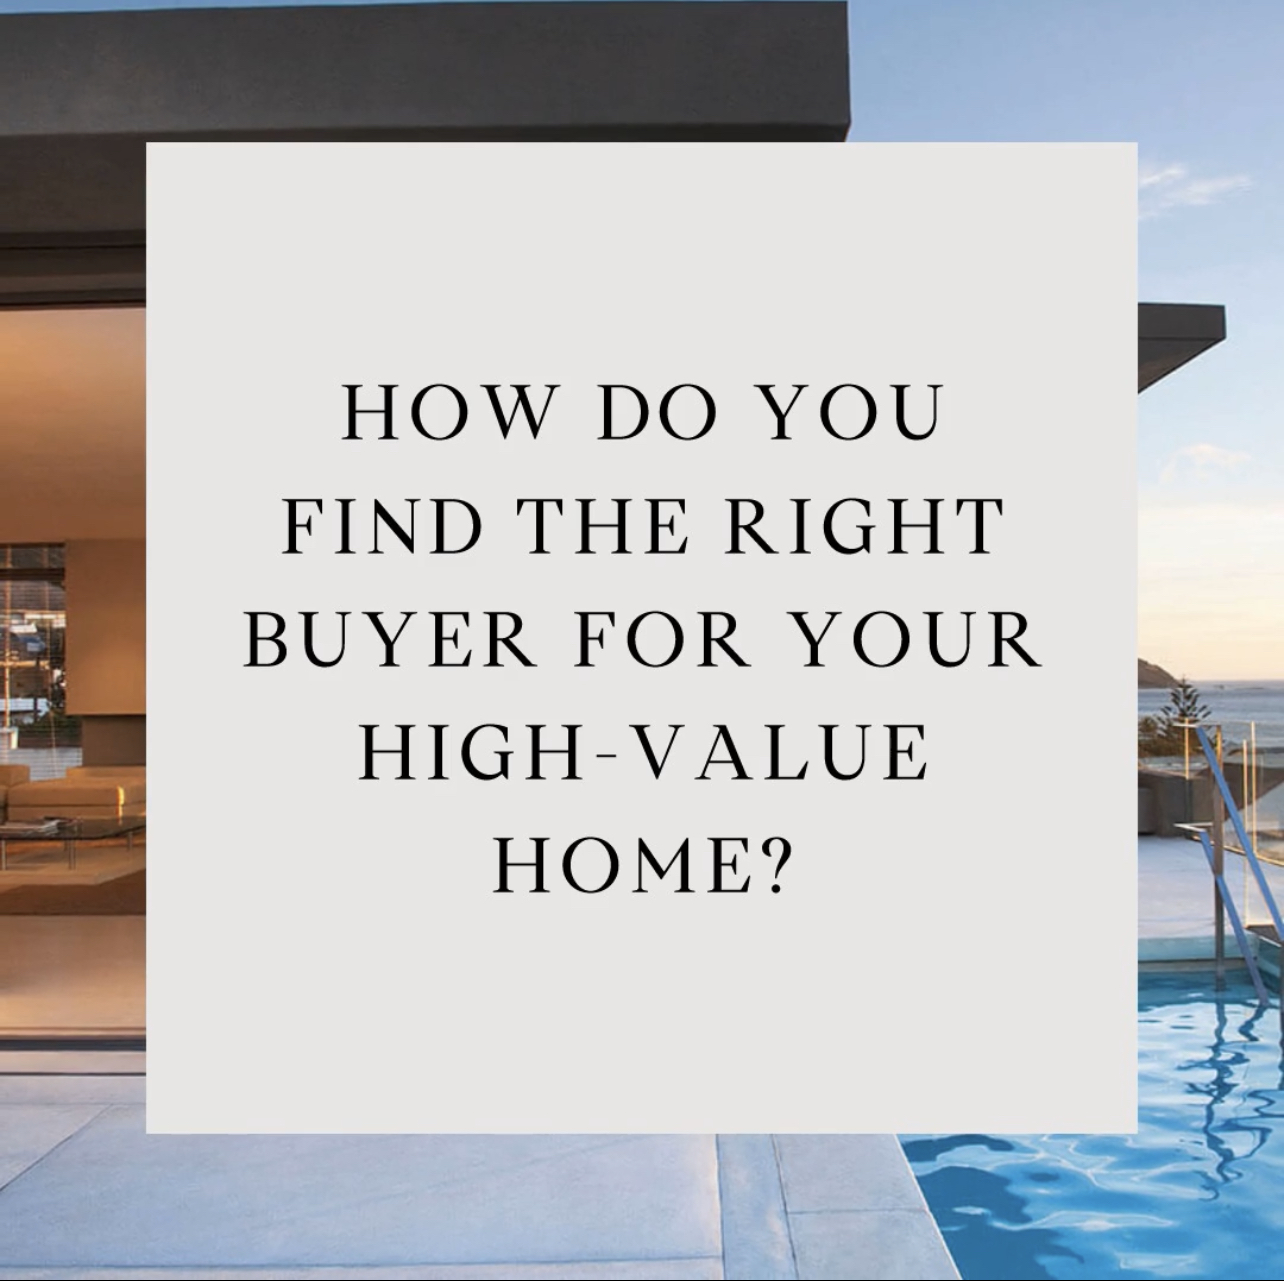 How Do You Find the Right Buyer for Your Home? Call Shirin Ramos Group.